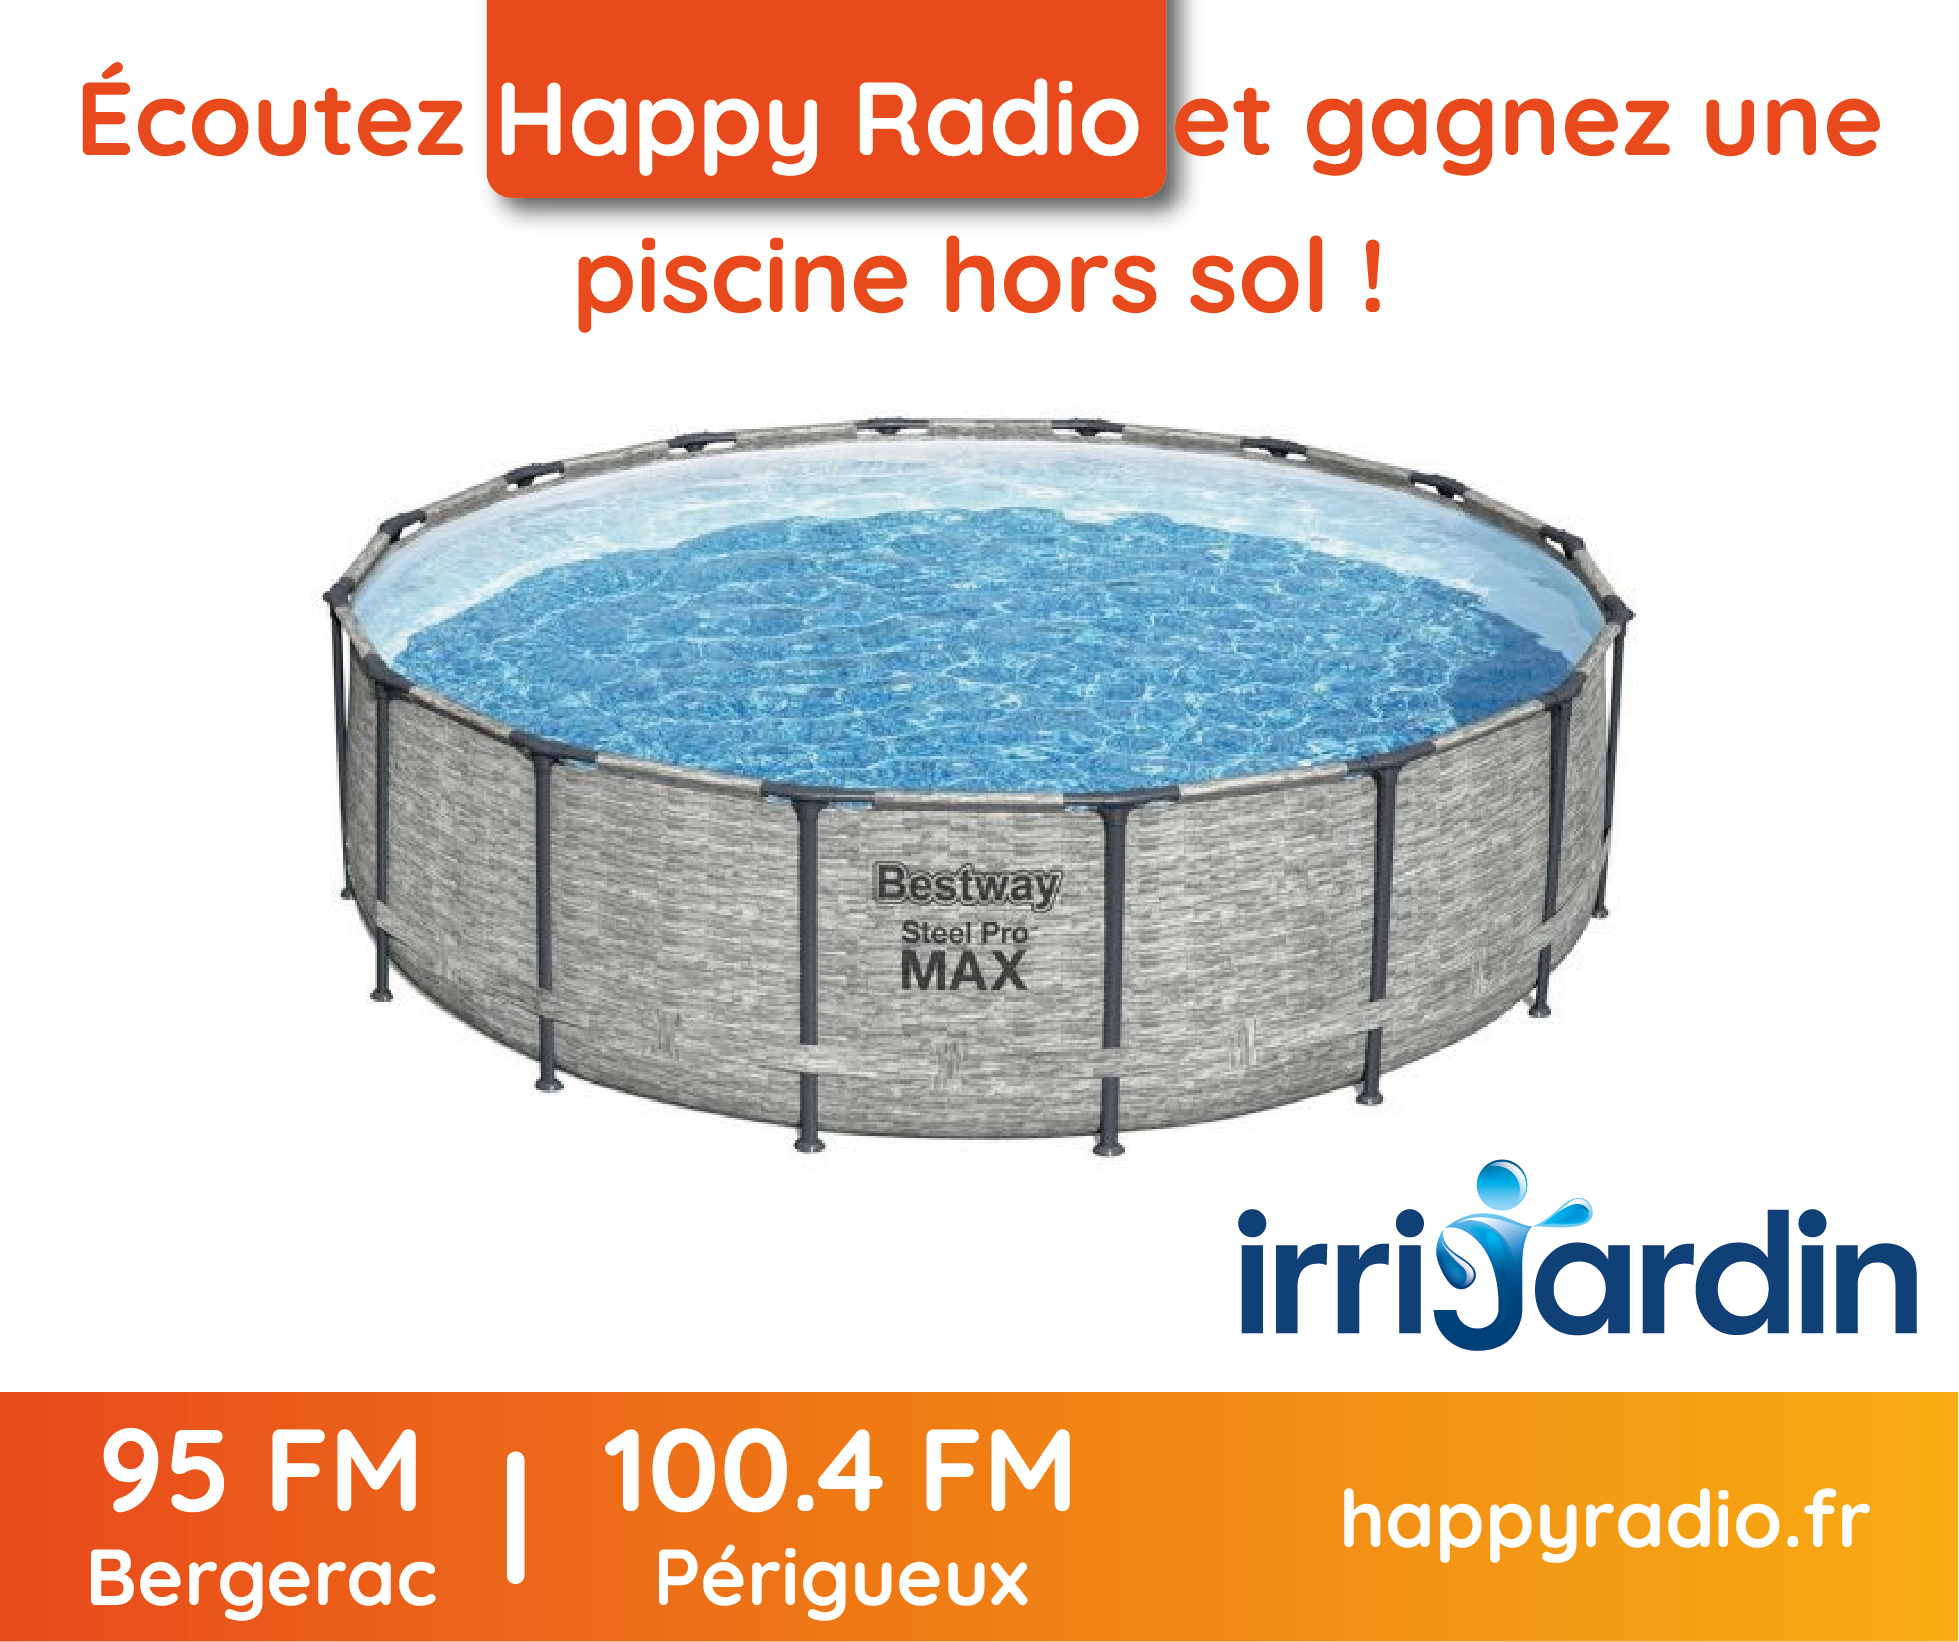 You are currently viewing Écouter Happy Radio et gagnez une piscine hors sol !